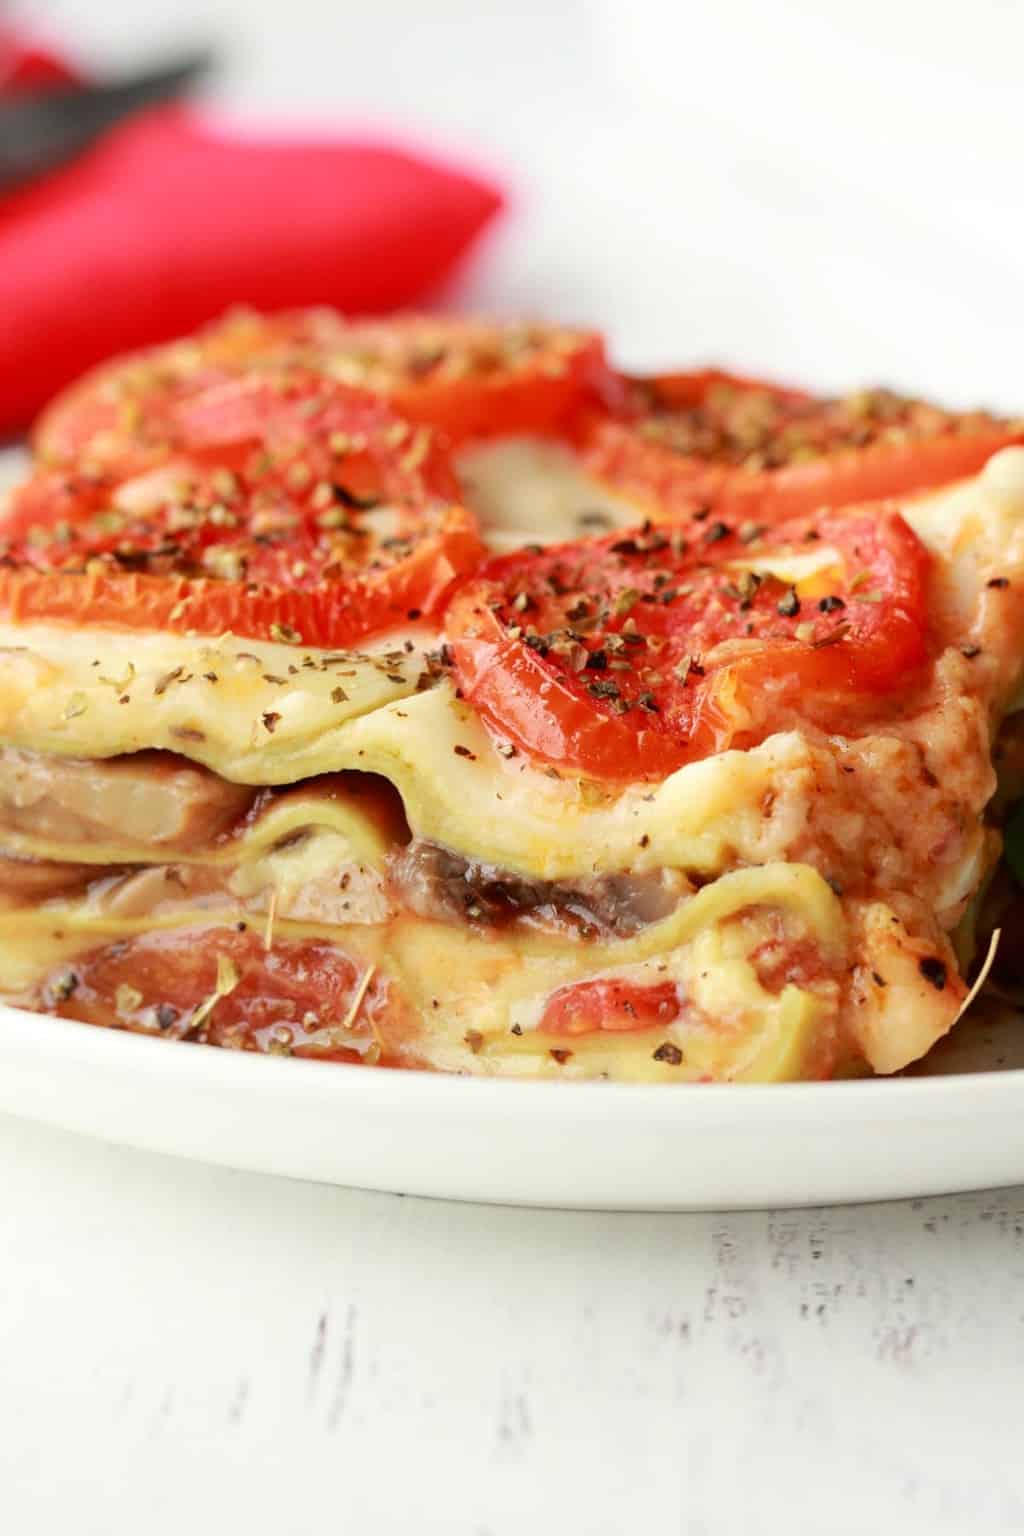 Slice of vegan lasagna topped with sliced tomato and black pepper on a white plate.